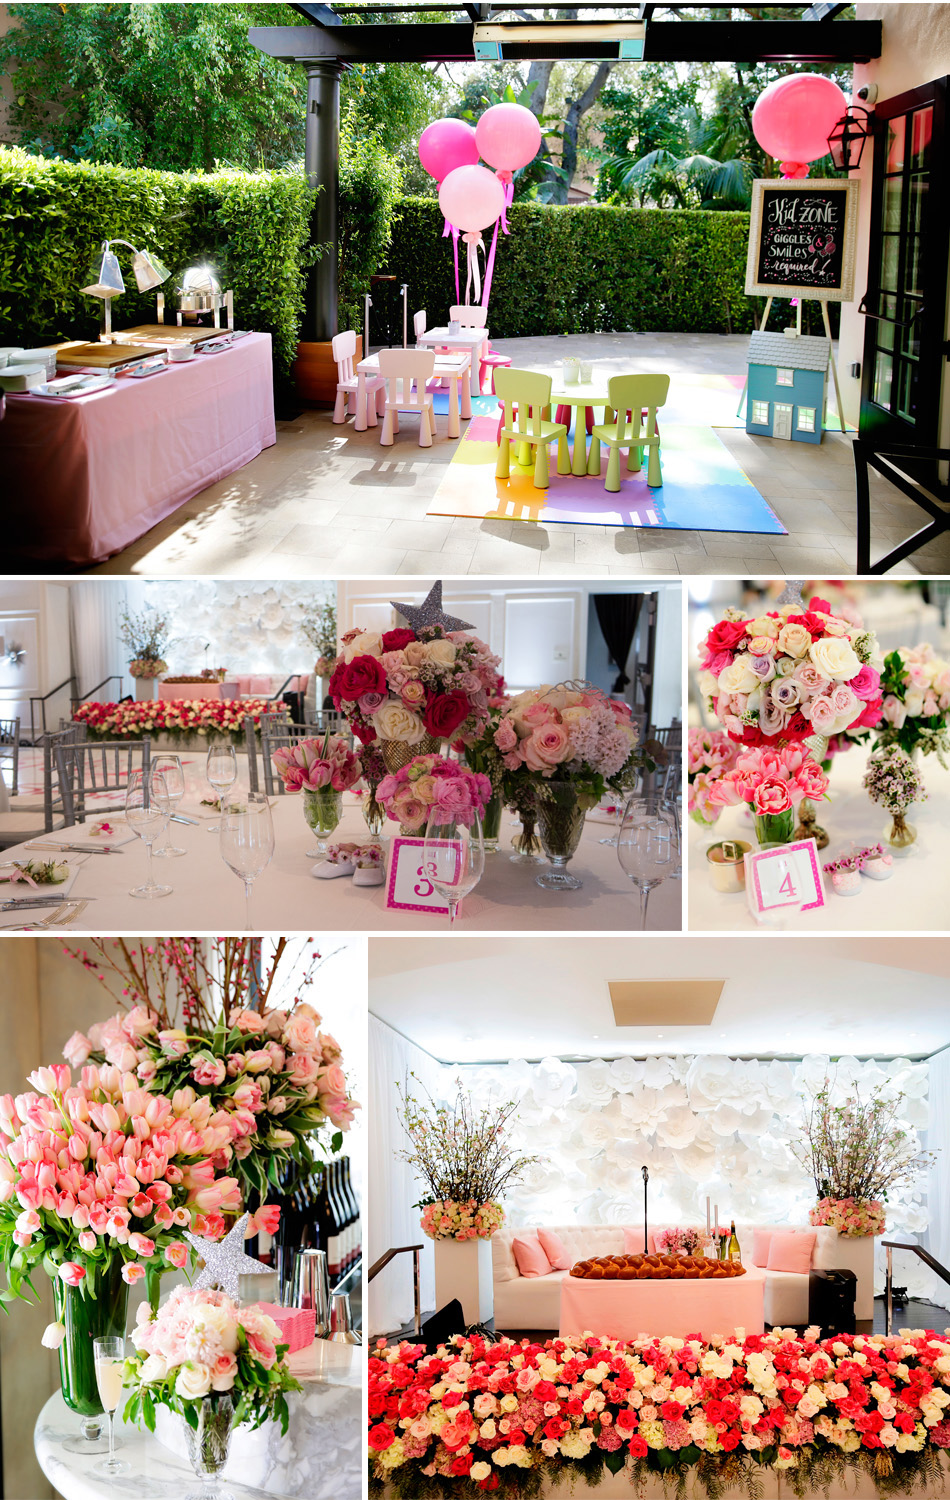 internationaleventcompany.com | International Event Company Los Angeles Wedding Planner and Designer | Birthday Parties at Hotel Bel Air | Luxury Event Planners in Southern California _ (1).jpg